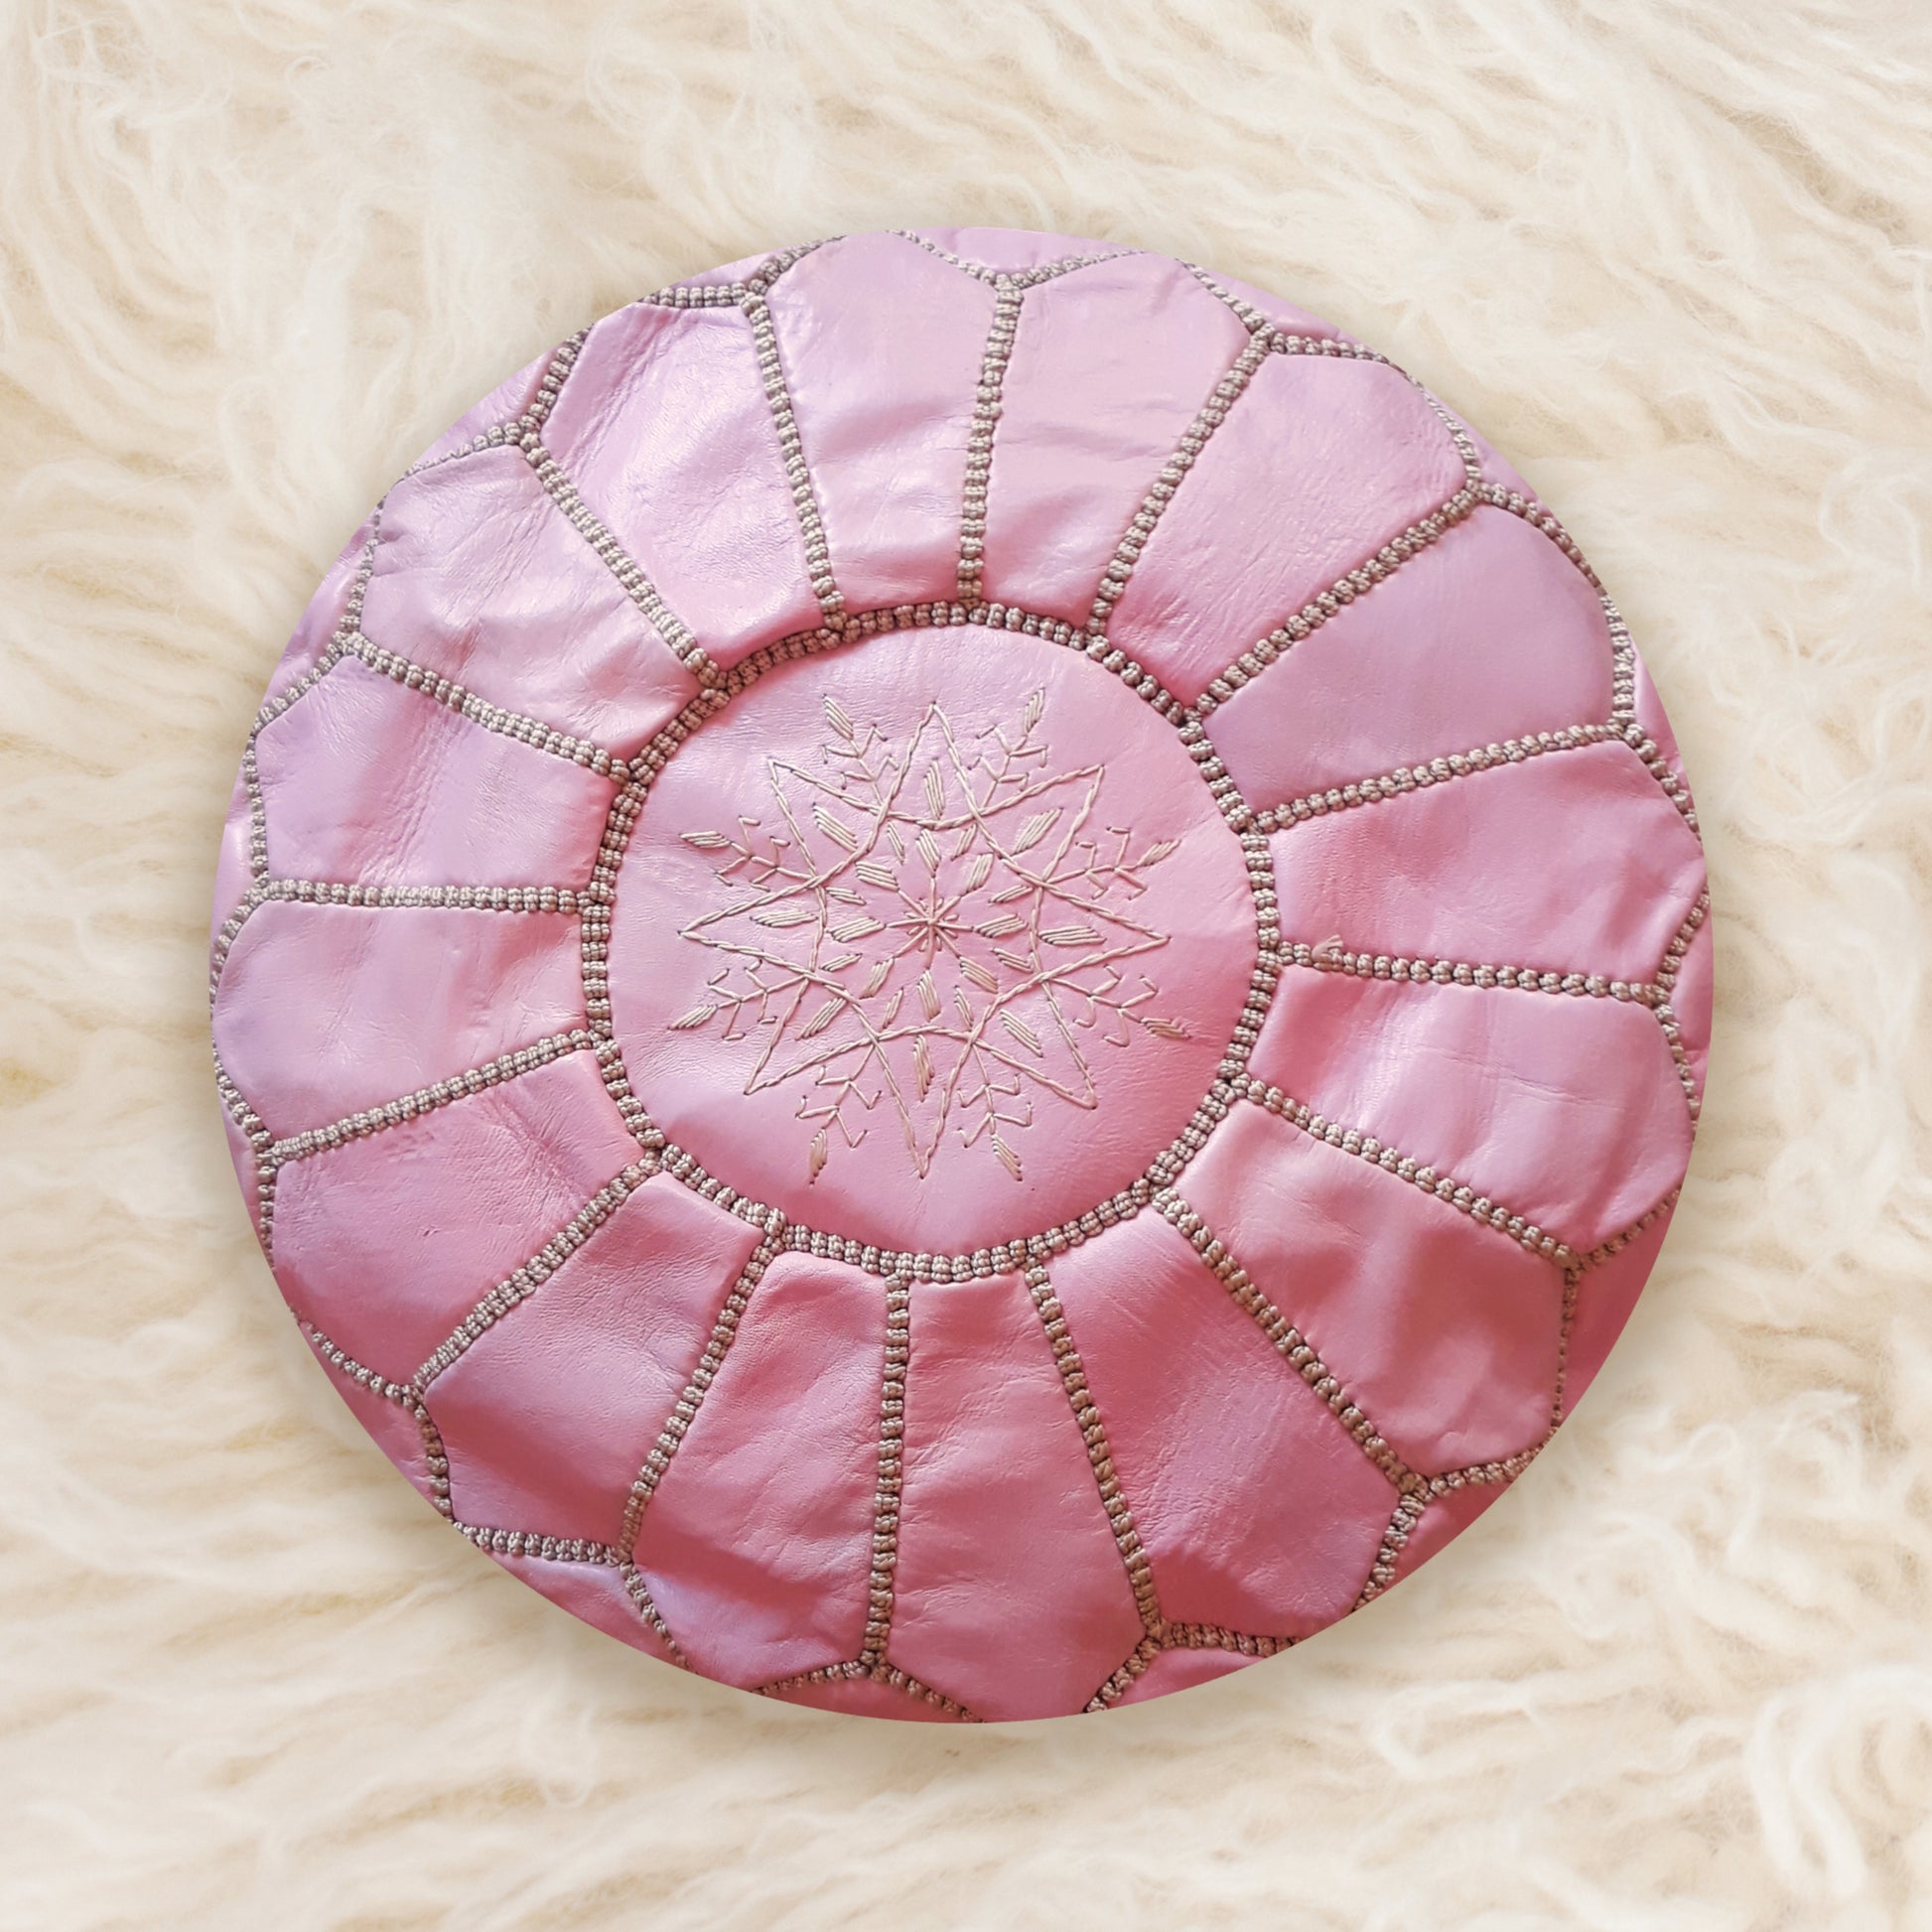 Pink Goat Skin Leather Pouf